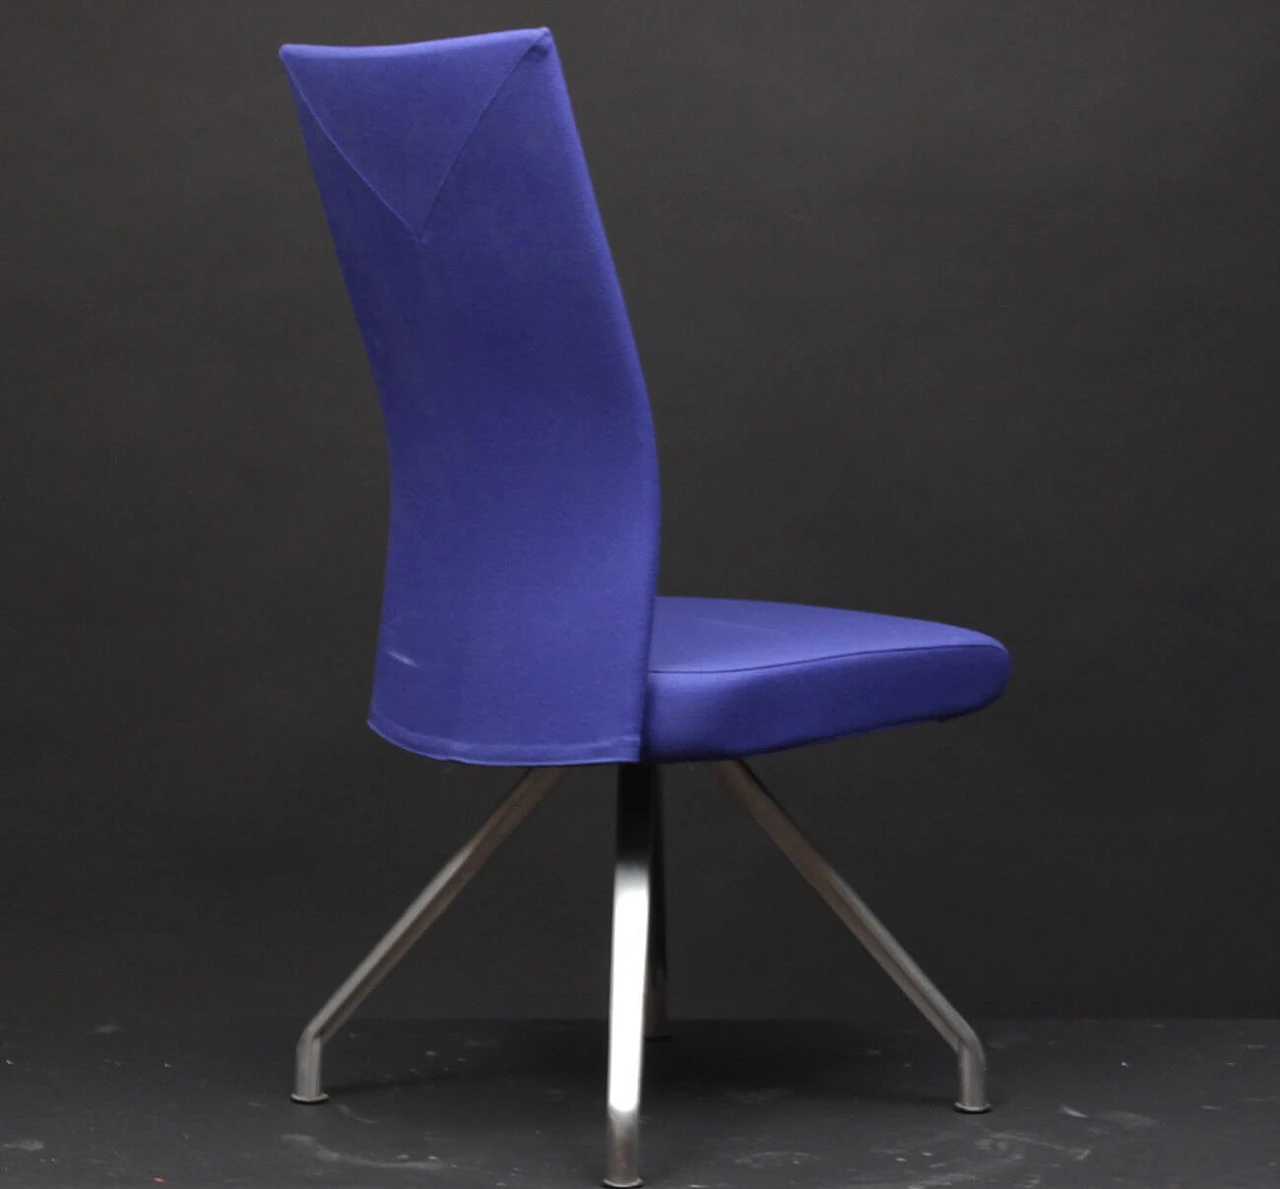 4 Spin 125M chairs in blue fabric by Burkhard Vogtherr for Fritz Hansen 11